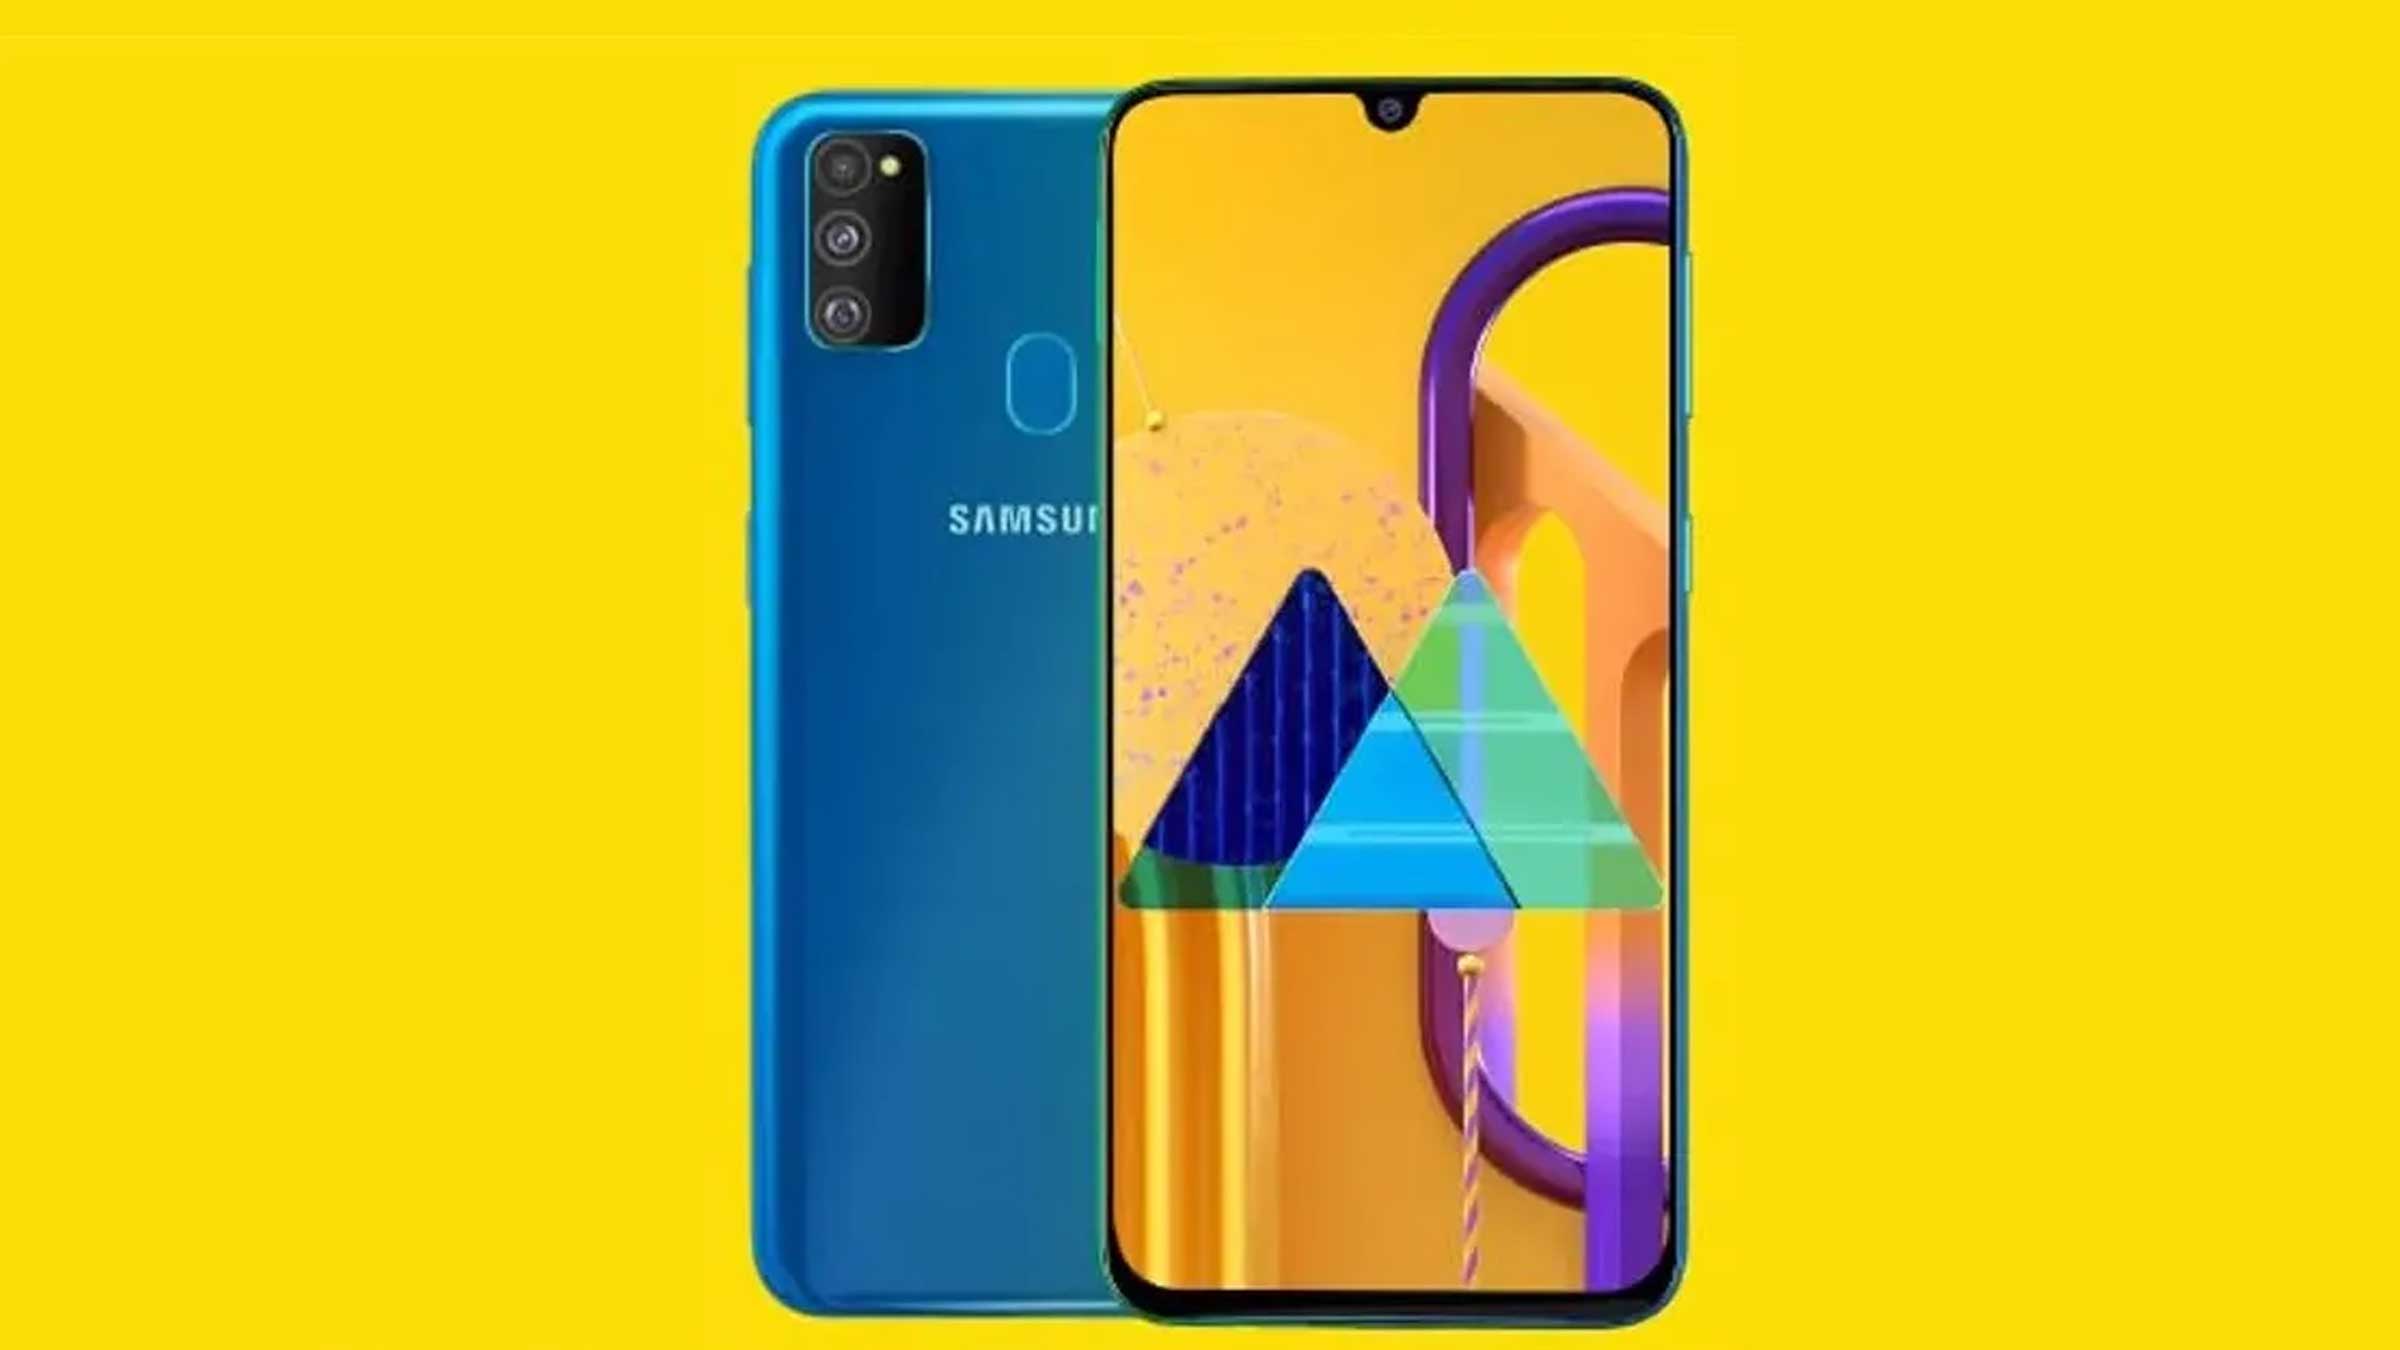 Samsung Galaxy M21 launched with 6000mAh battery